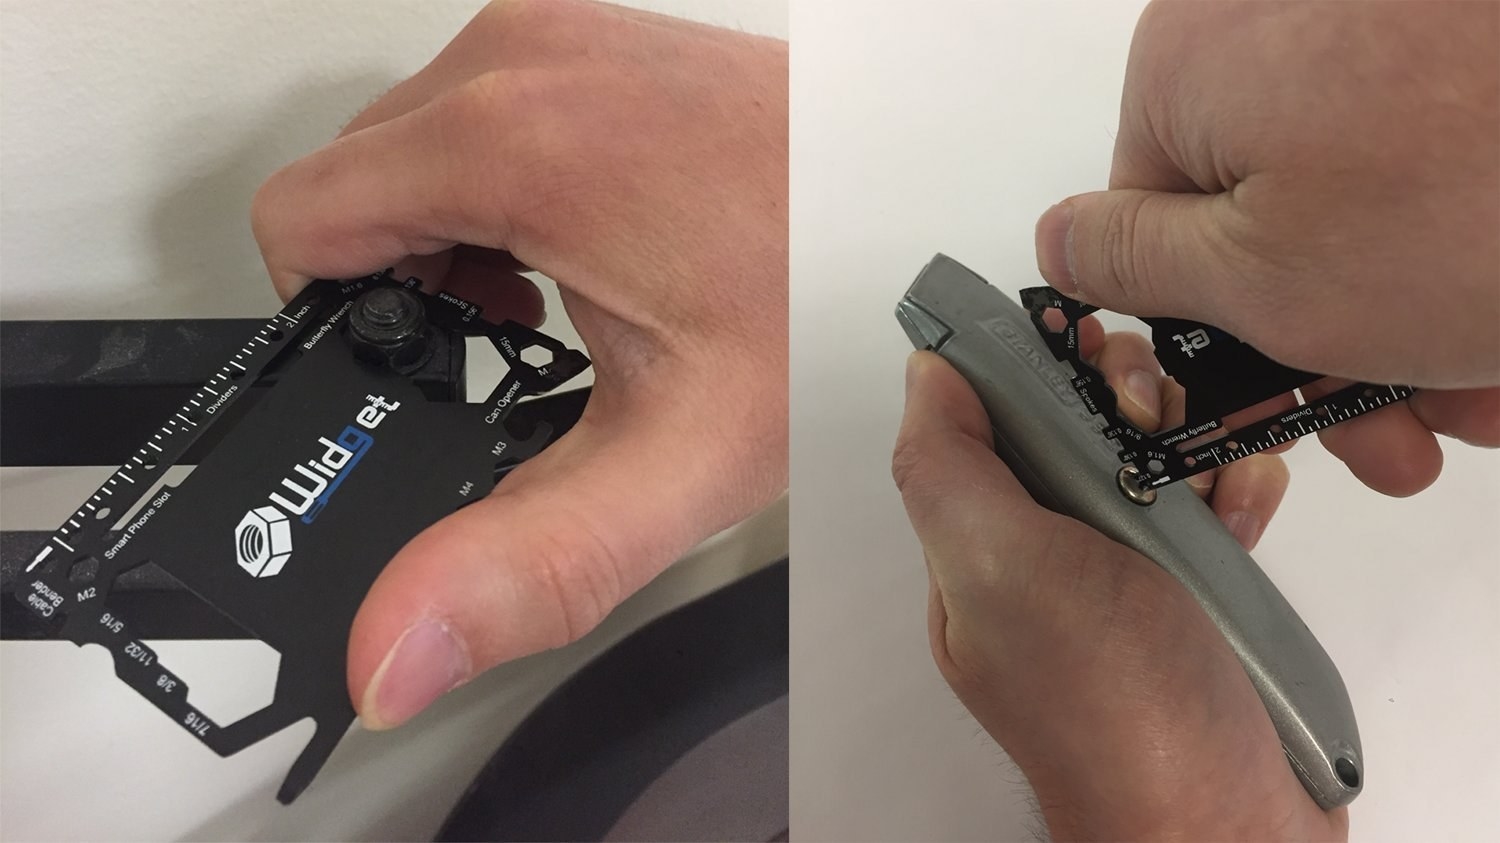 model holding the credit card-shaped tool on the left and the same model using the tool as a screwdriver on the right